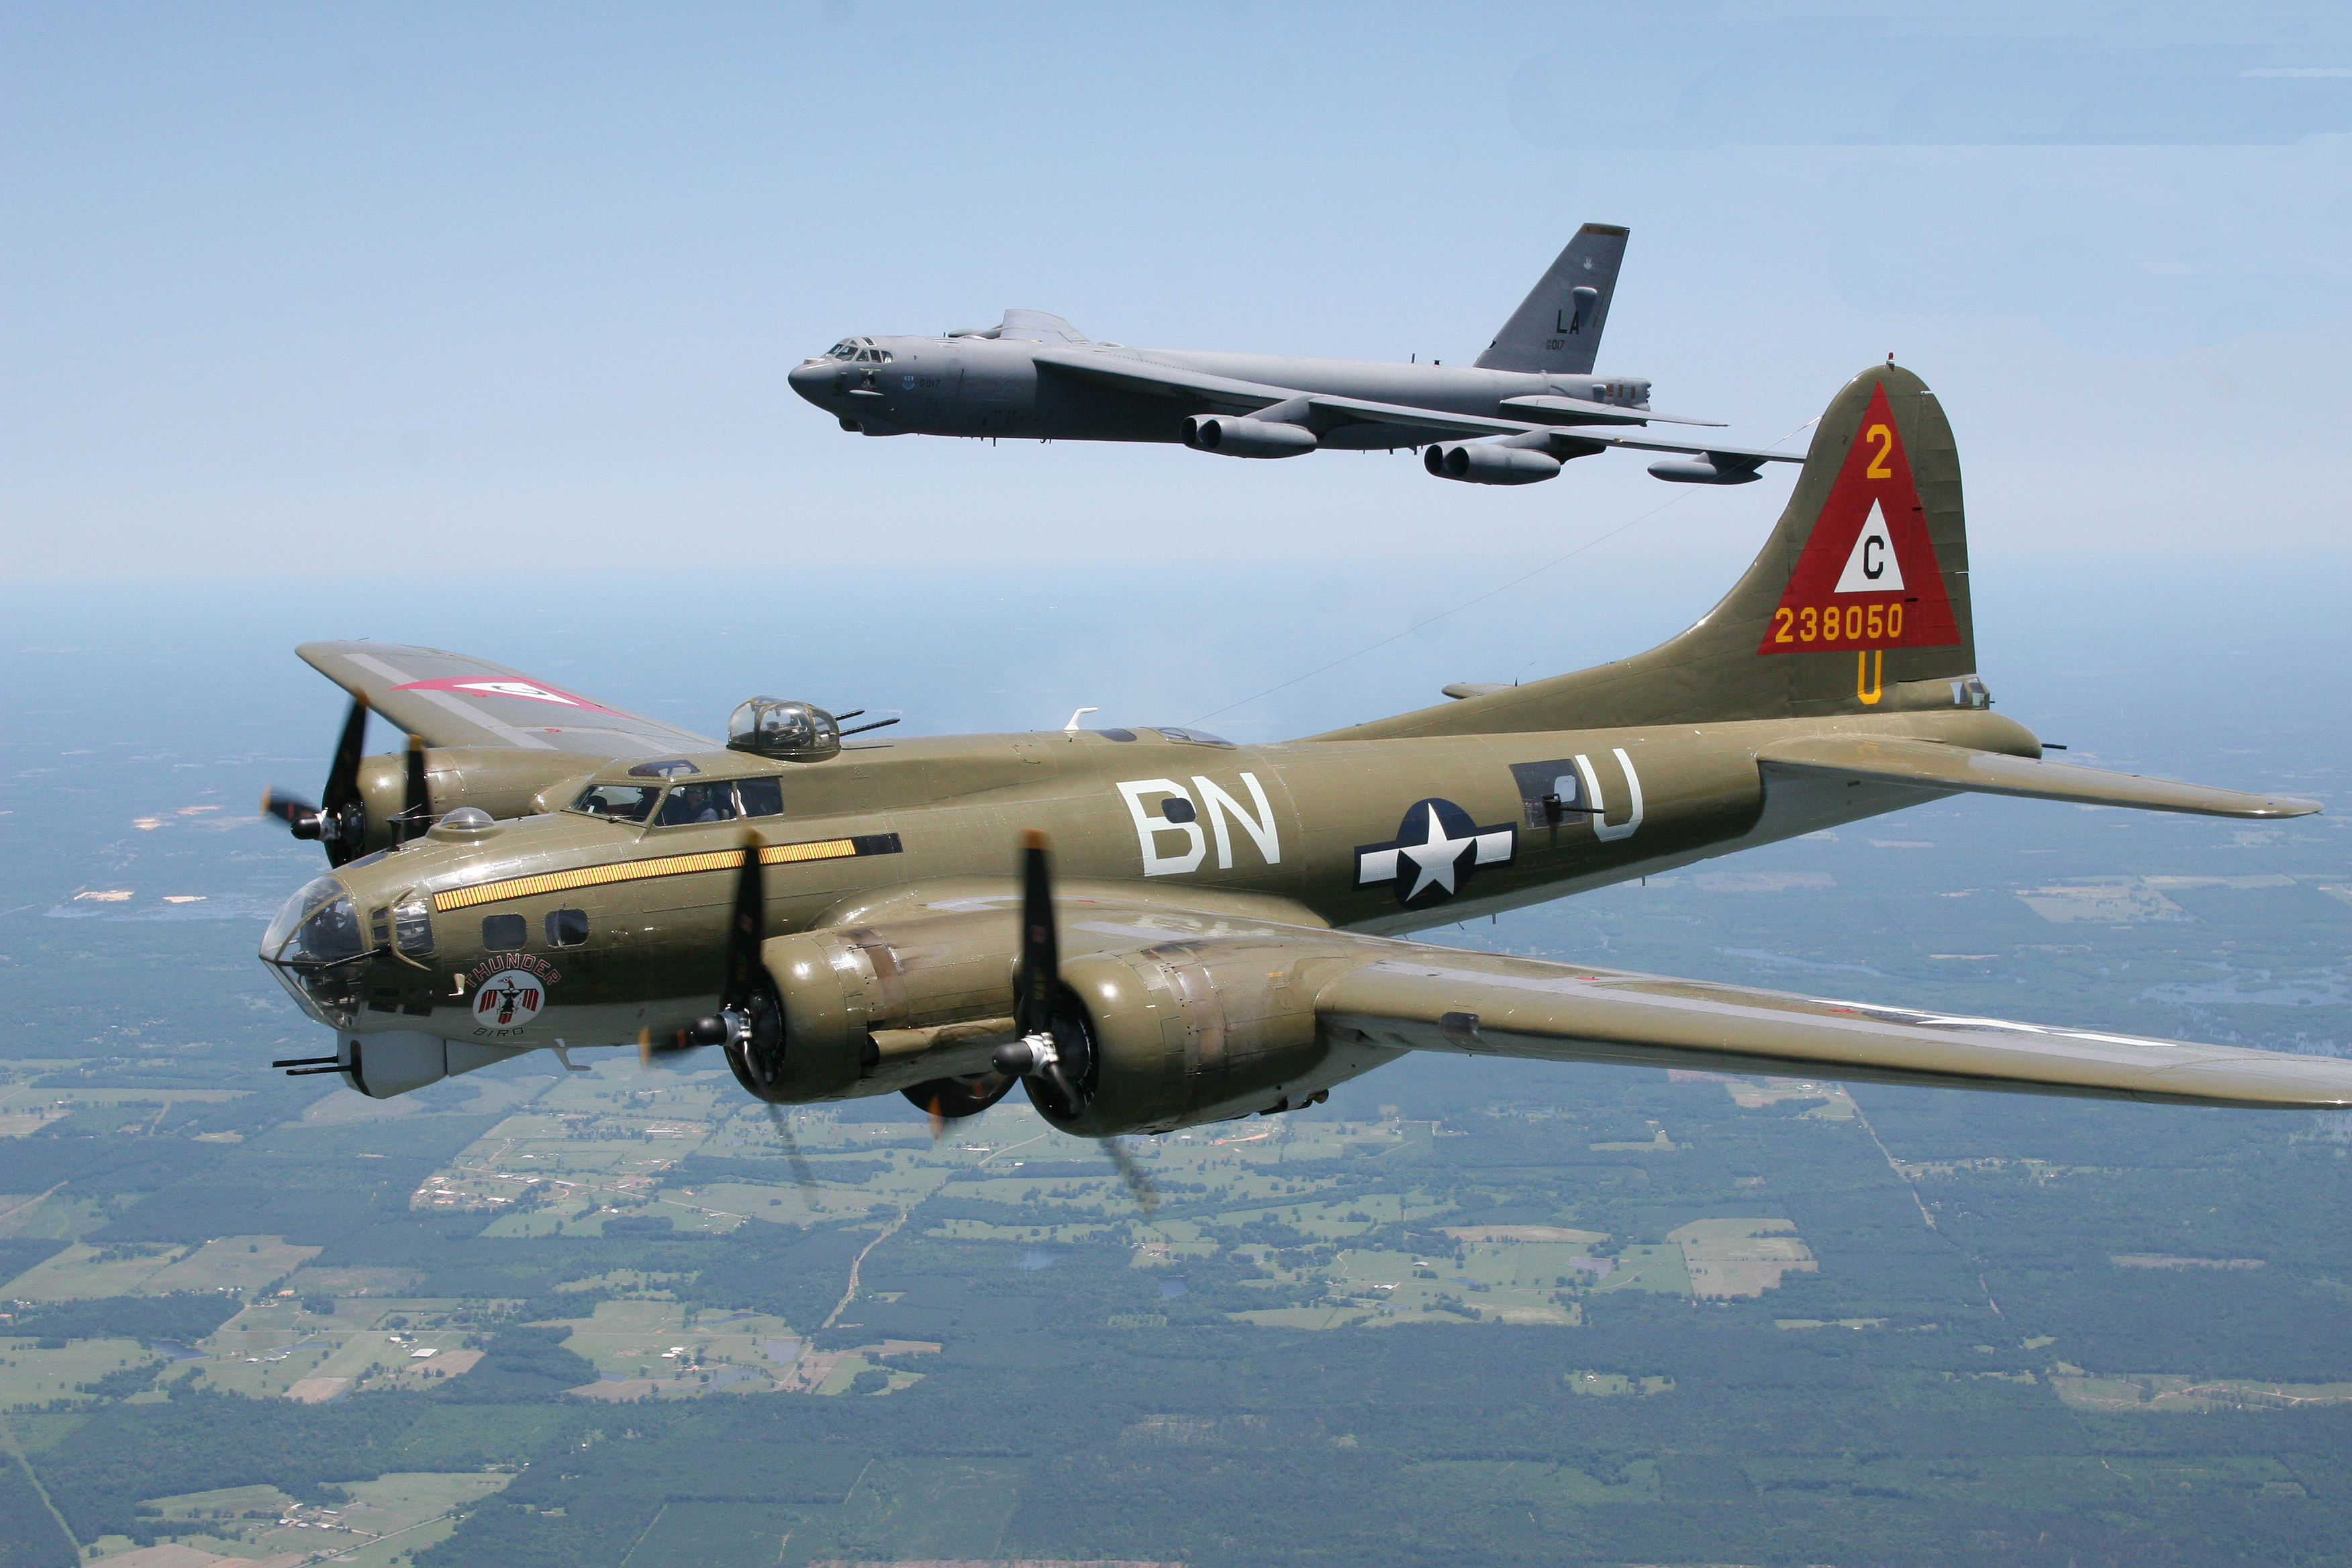 Boeing B-17 Flying Fortress #4